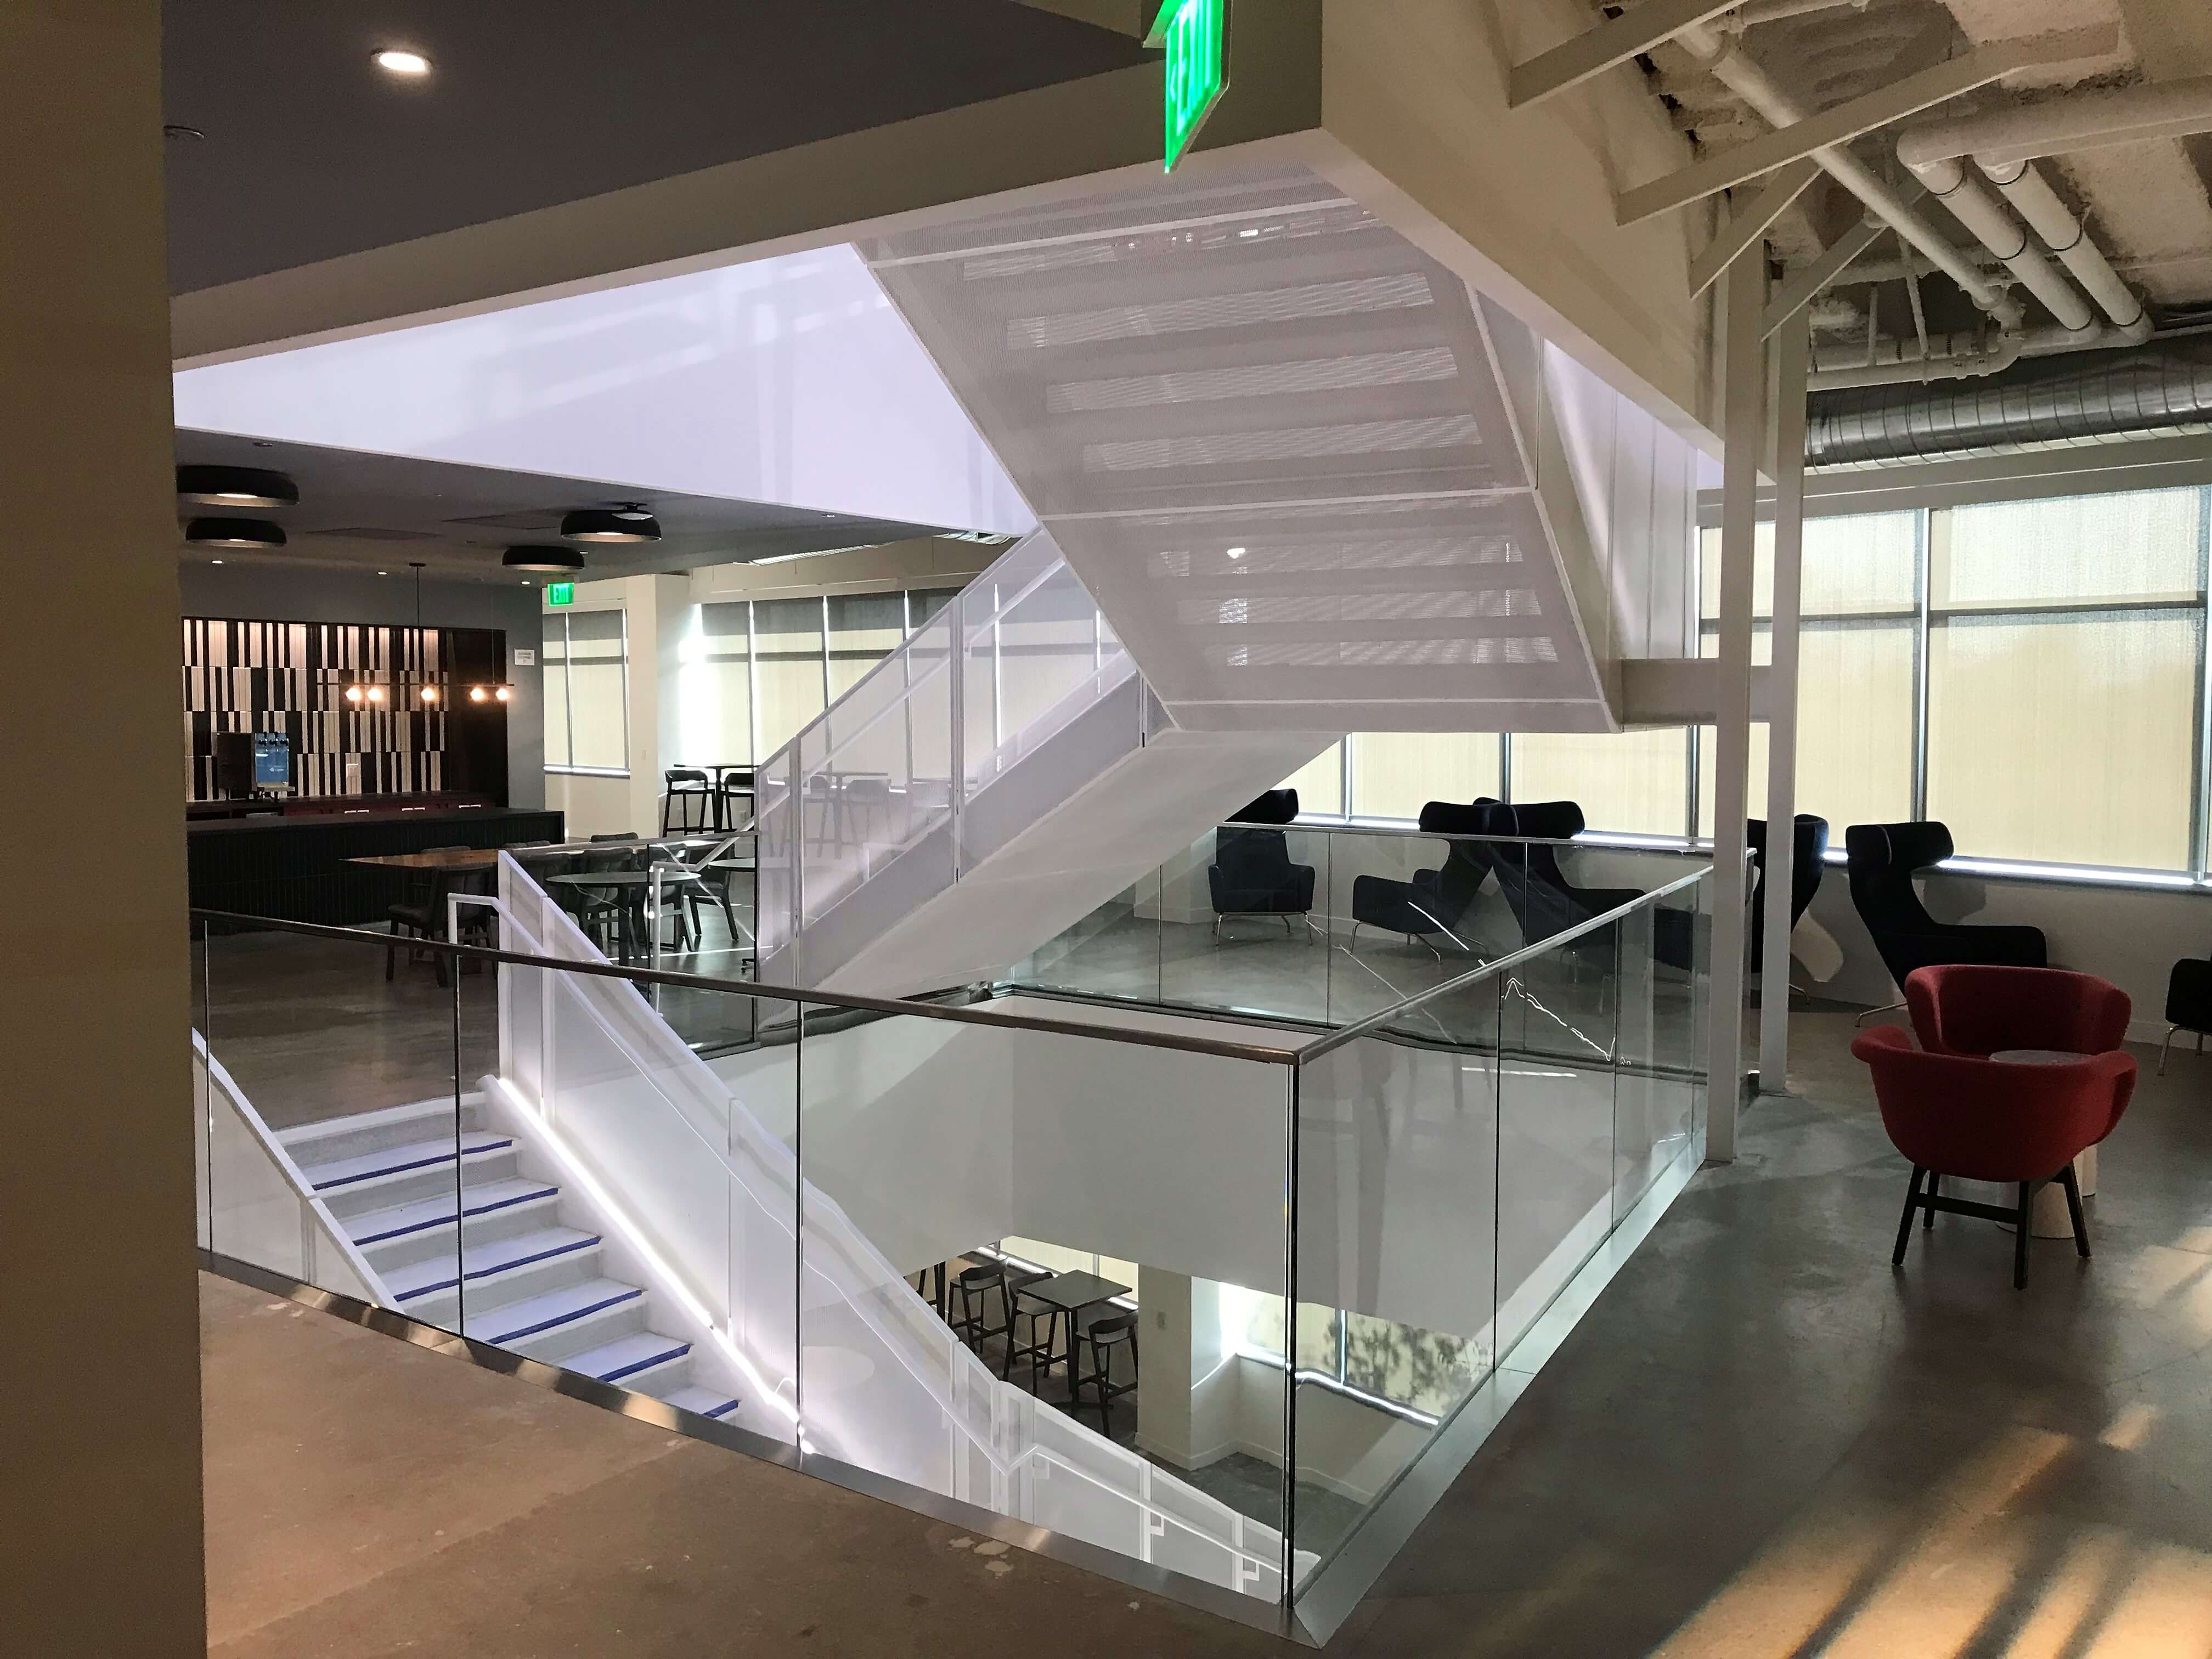 Google Offices, CA, Optik Shoe with glass infill panels